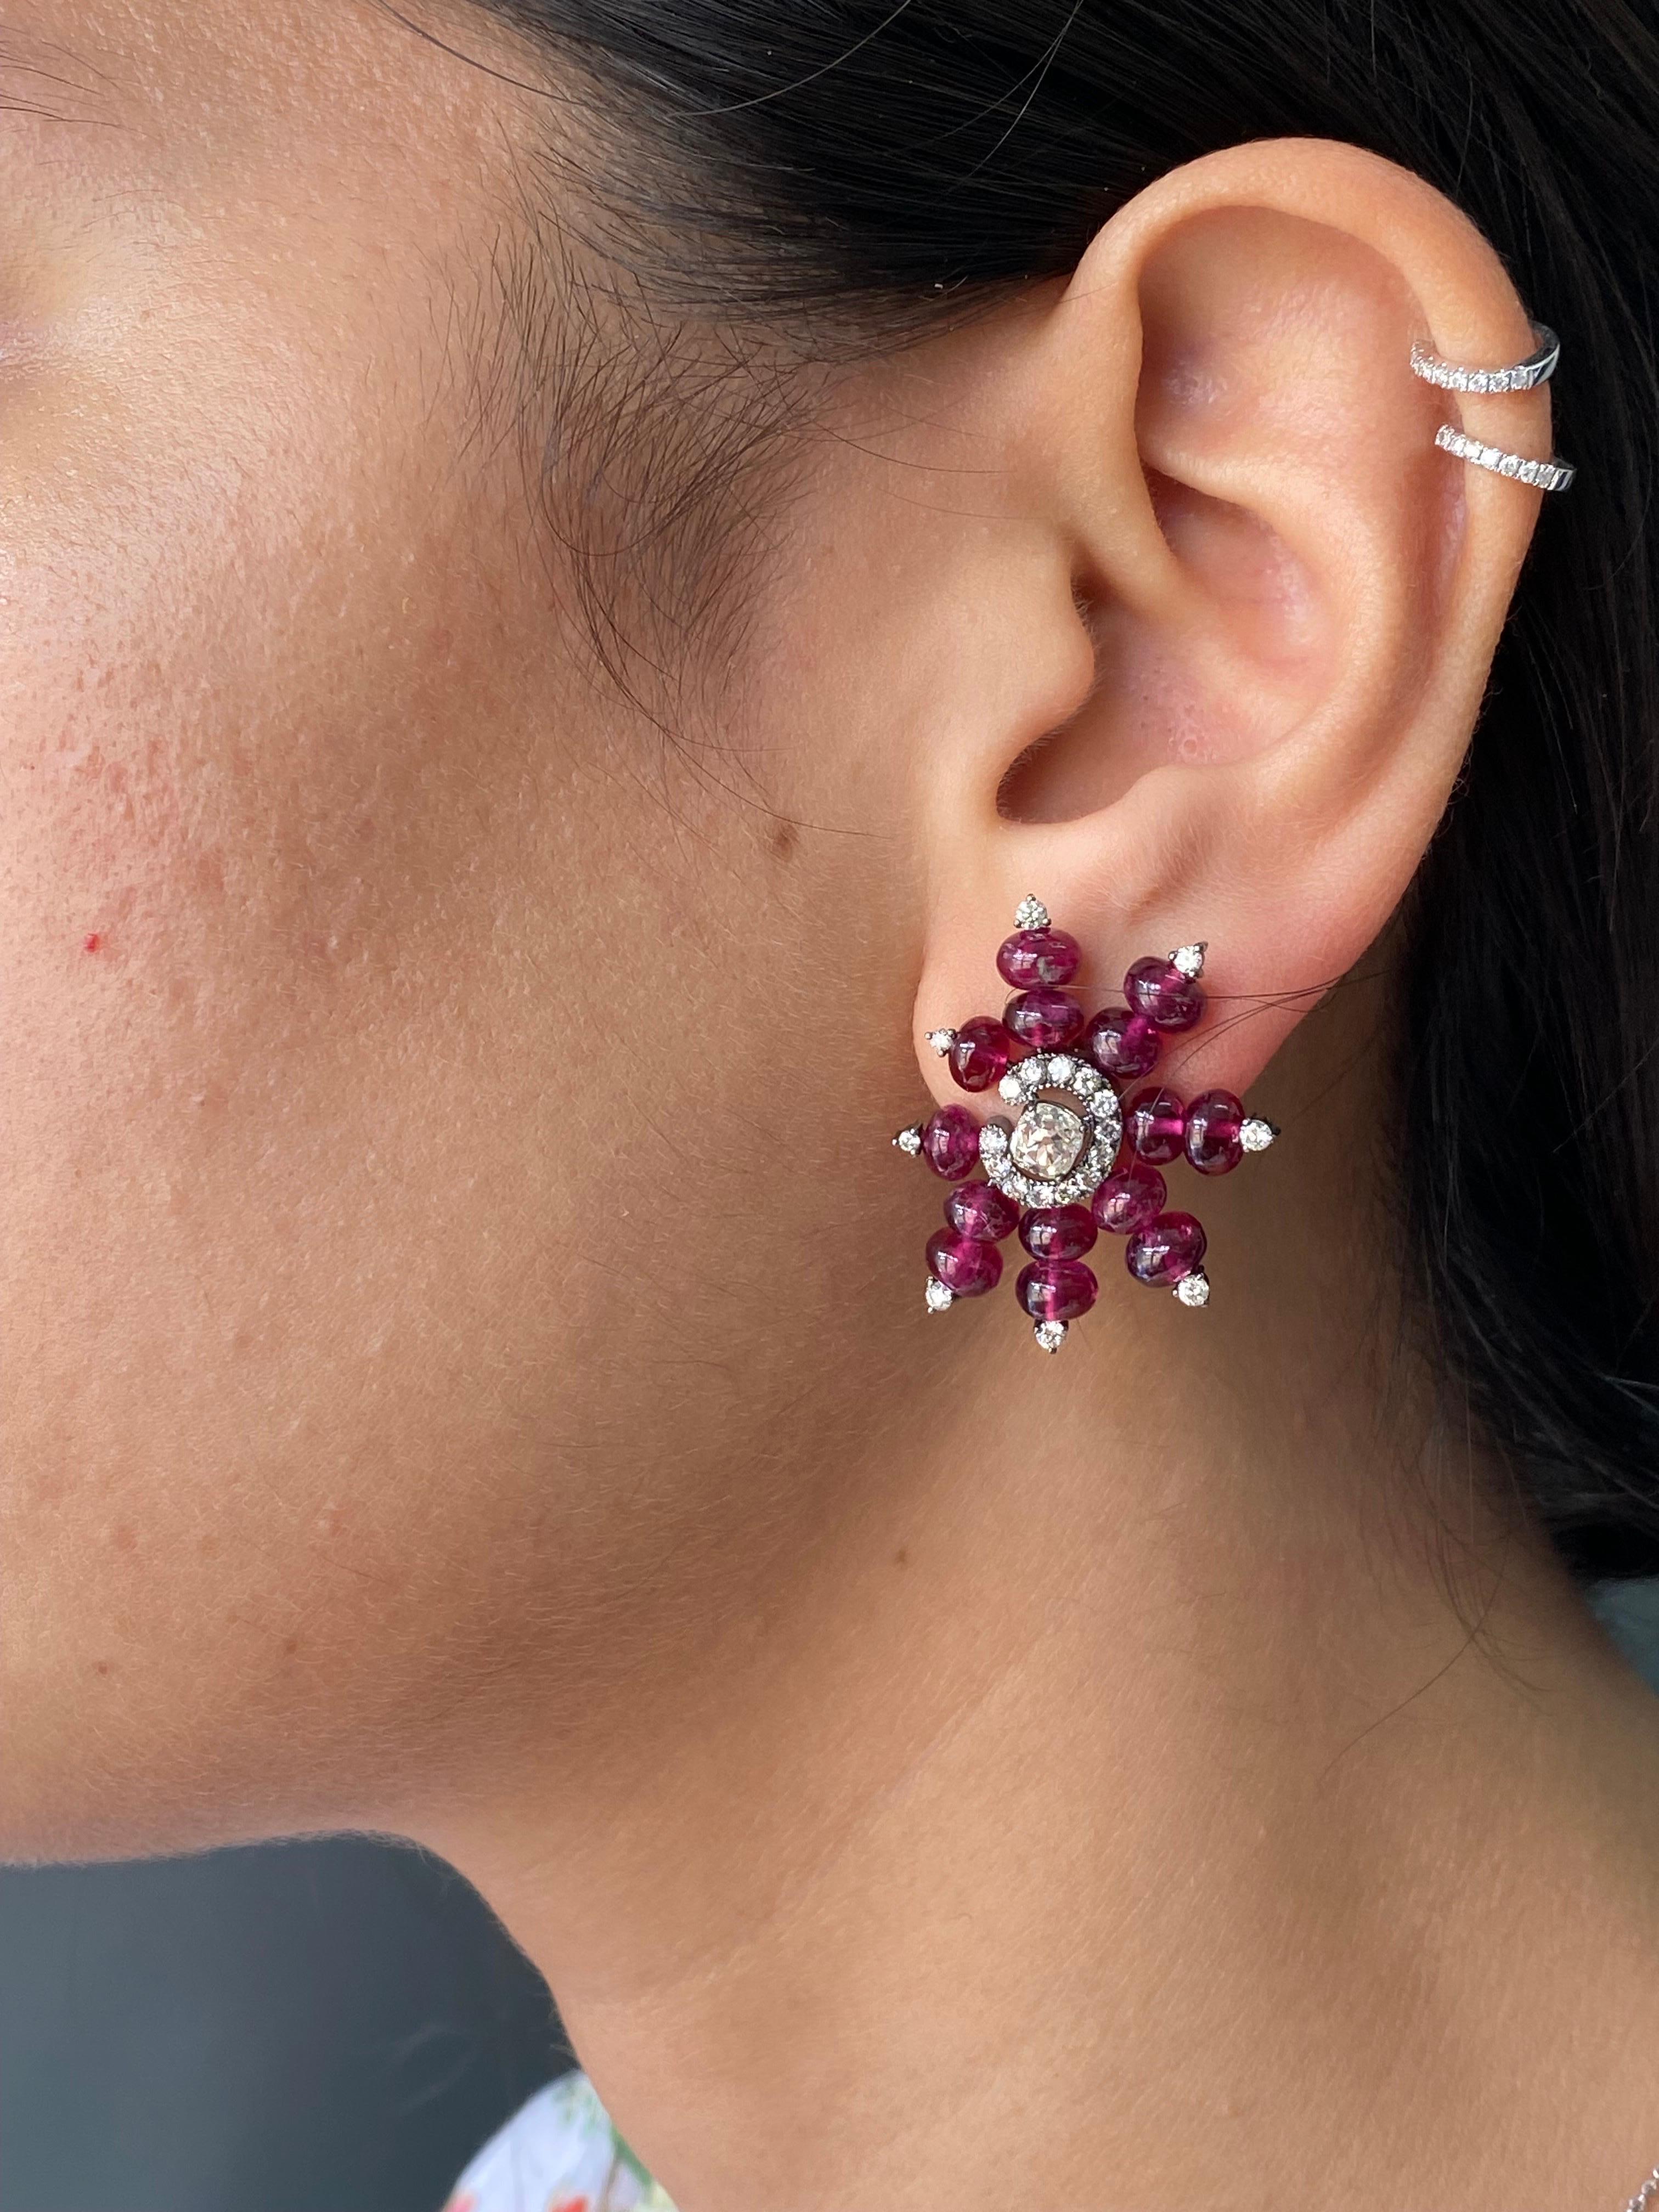 A modern looking 23.93 carat tourmaline and 1.99 carats diamond studs, with the center diamond stone weighing 0.84 in total. The earrings are made in solid 18K gold, black rhodium polish - giving it a very unique look. Comes with a push pull